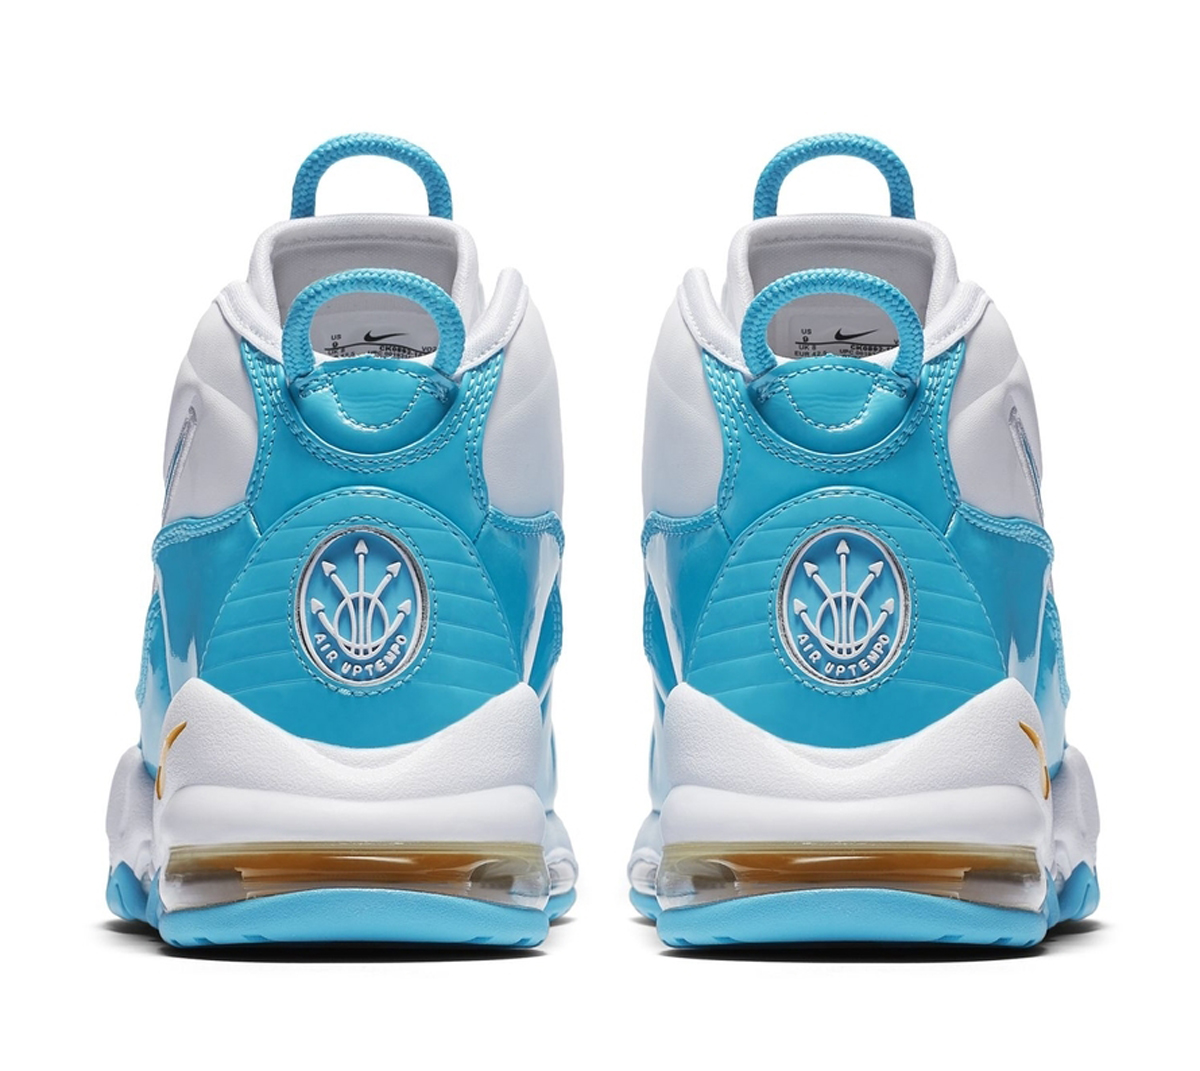 Nike Air Max Uptempo 95 - WearTesters